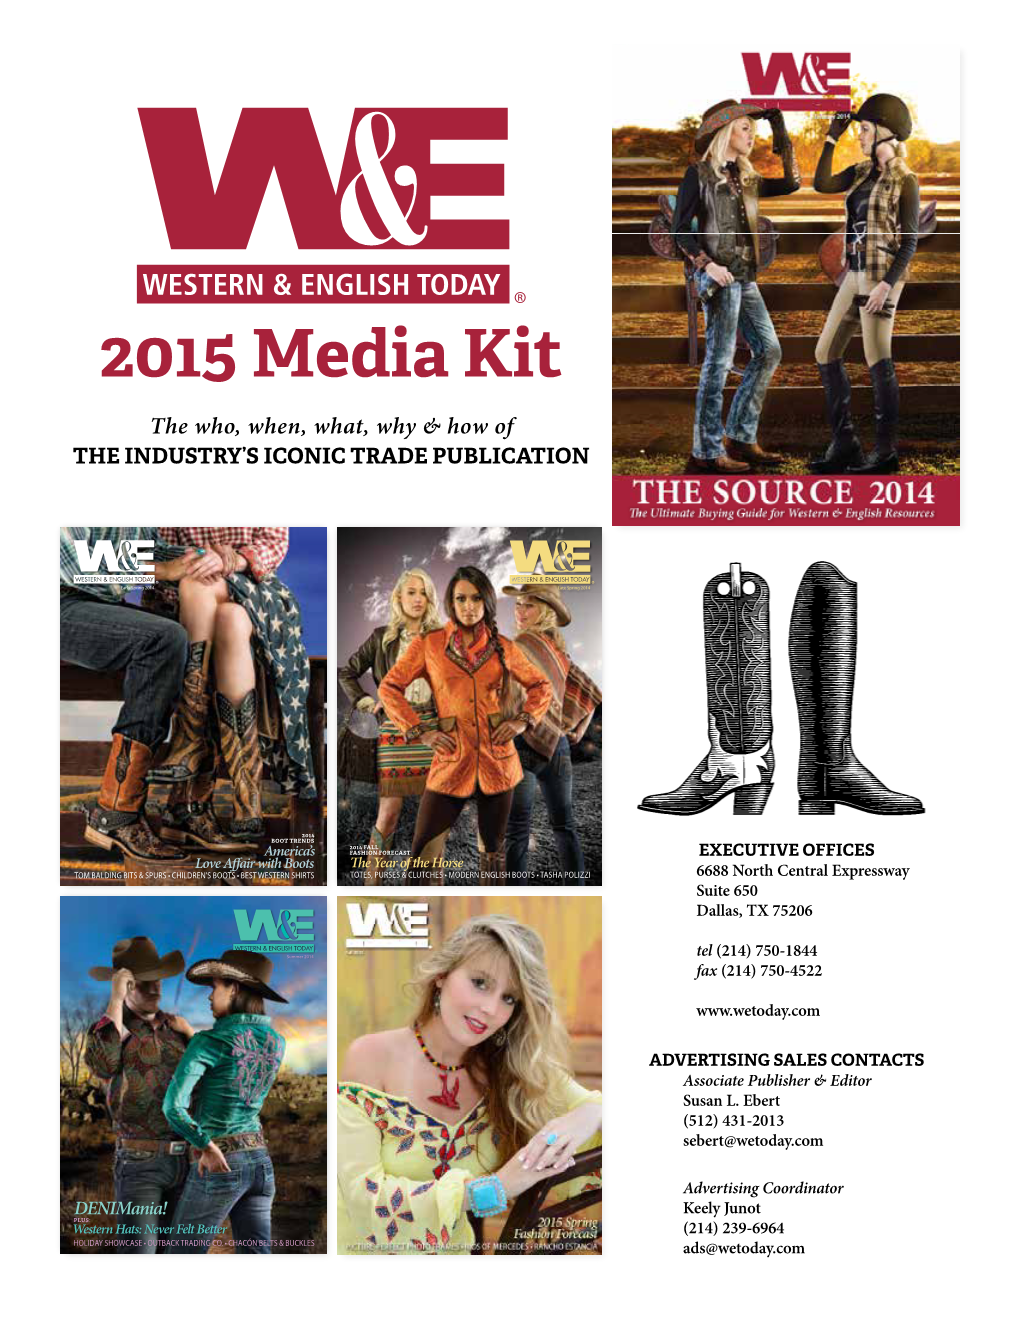 2015 Media Kit the Who, When, What, Why & How of the INDUSTRY’S ICONIC TRADE PUBLICATION